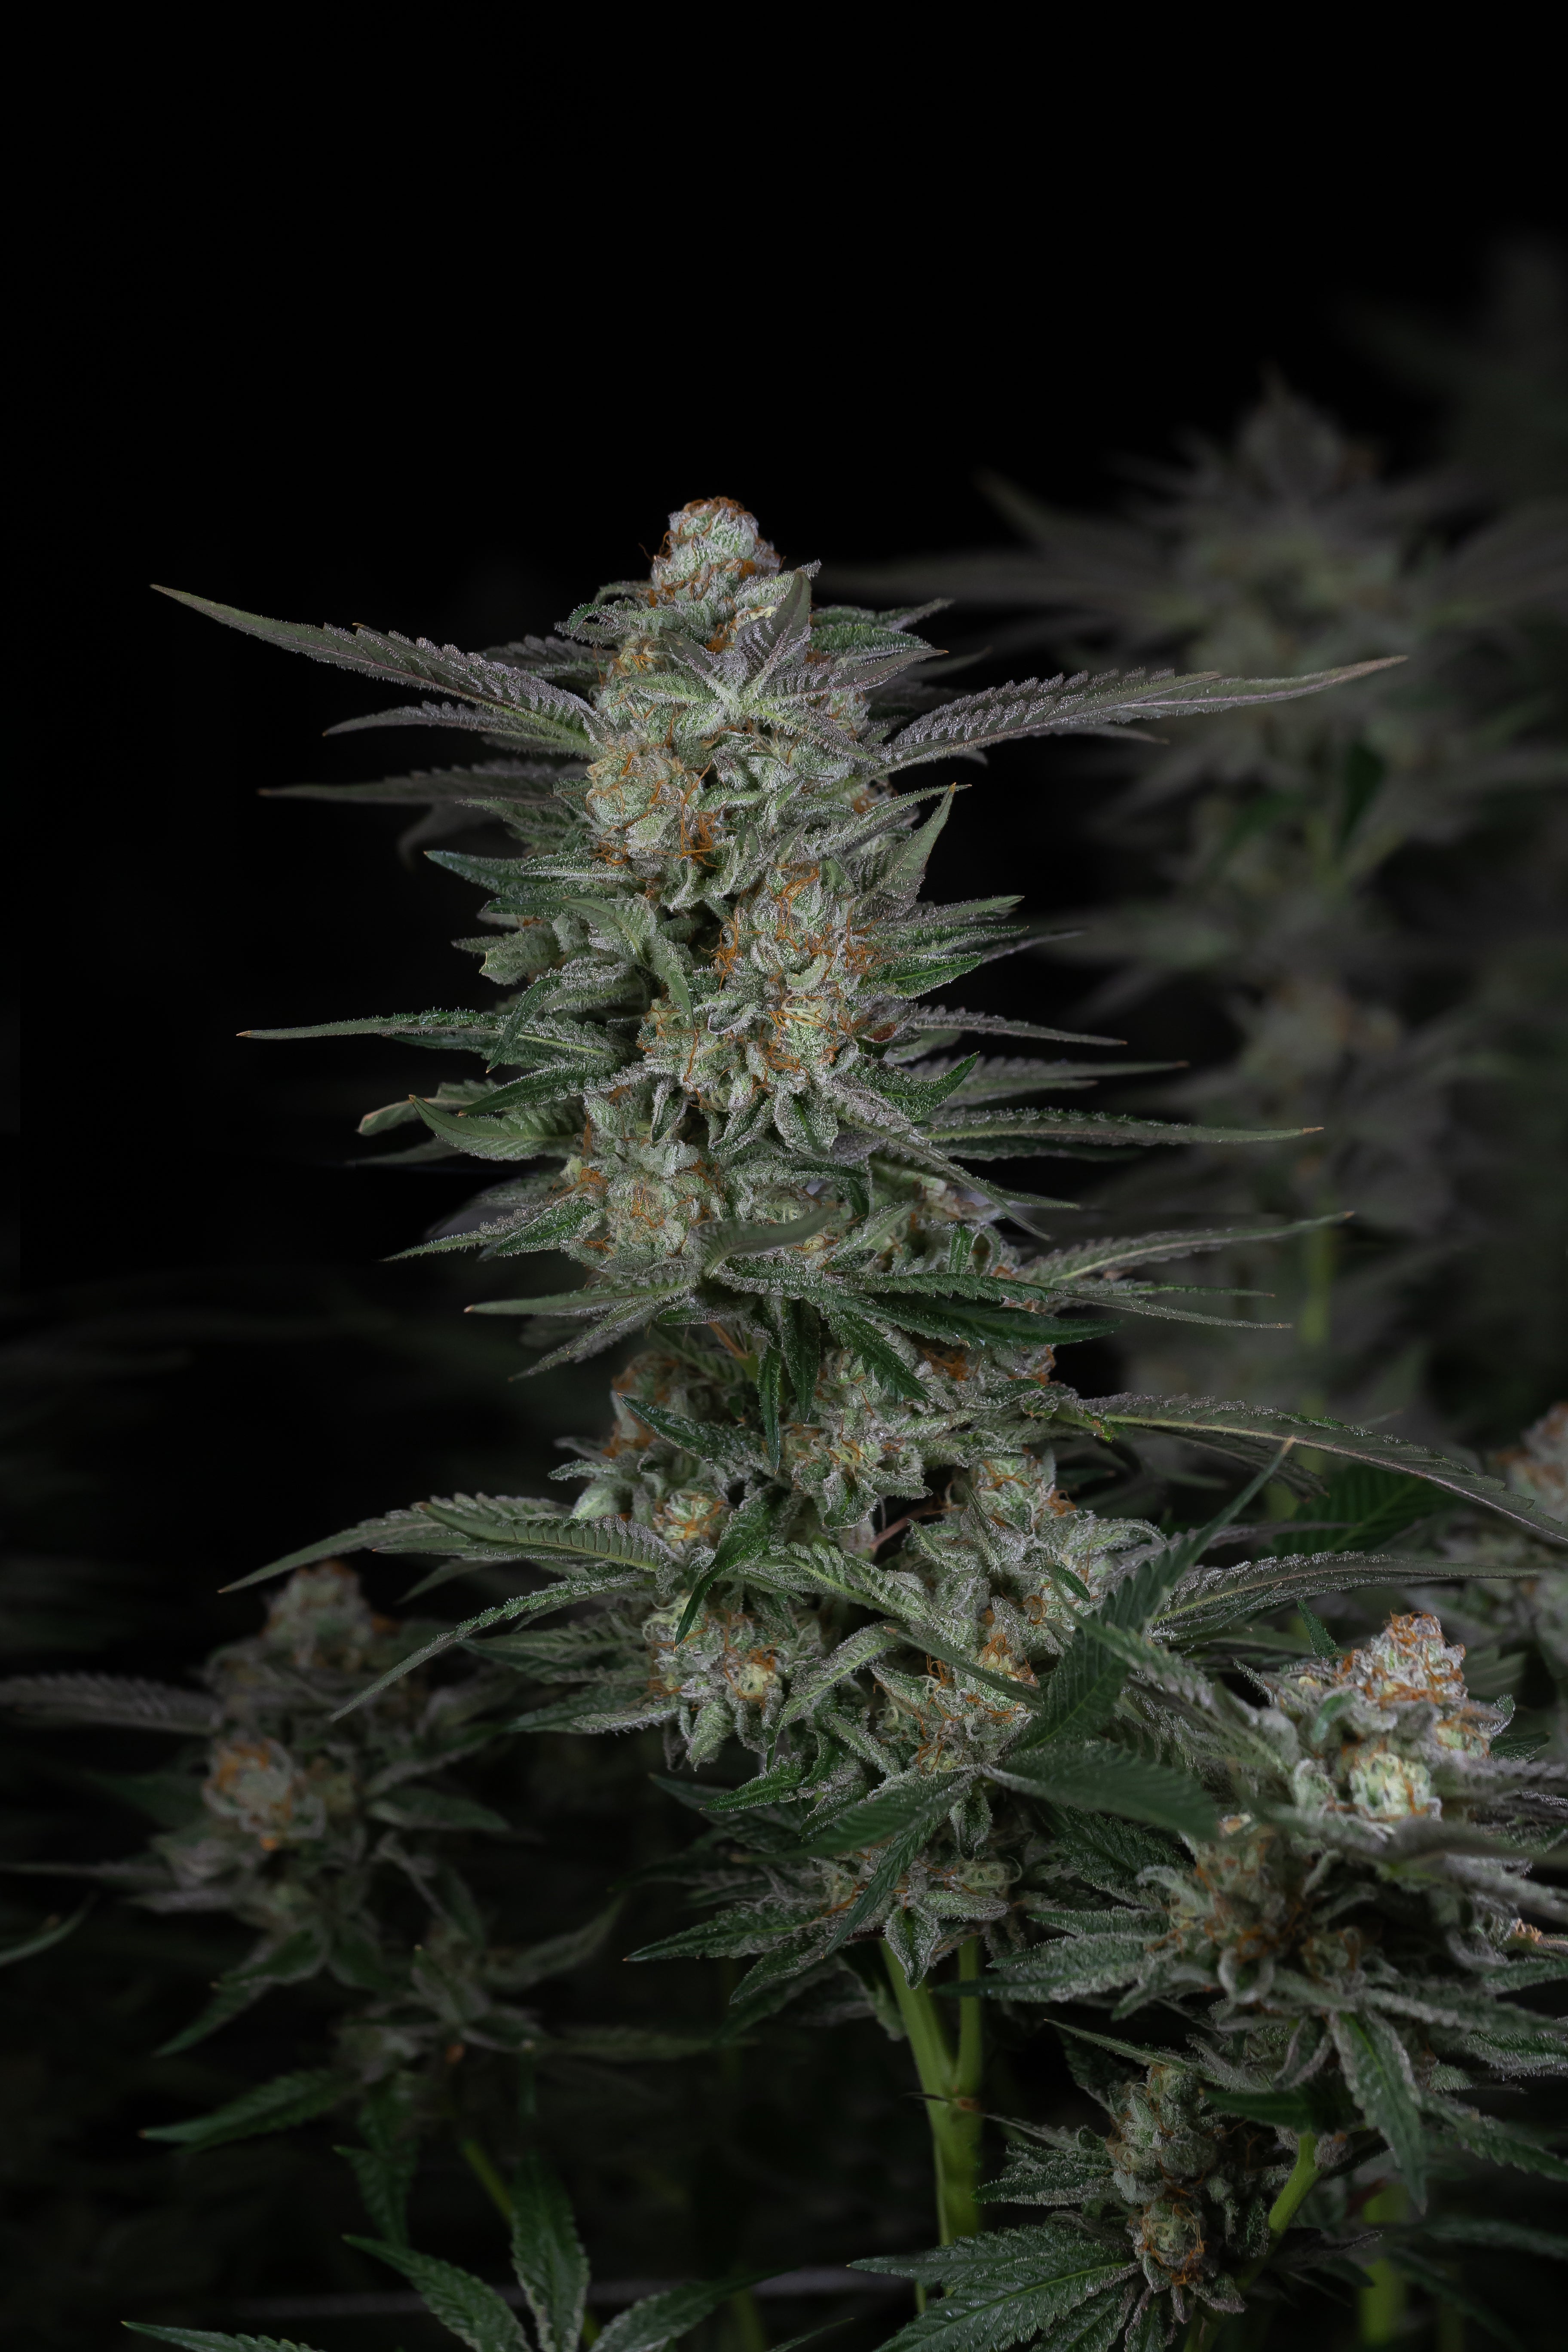 A tall stalk of bright green cannabis flower buds stands against a black backdrop.